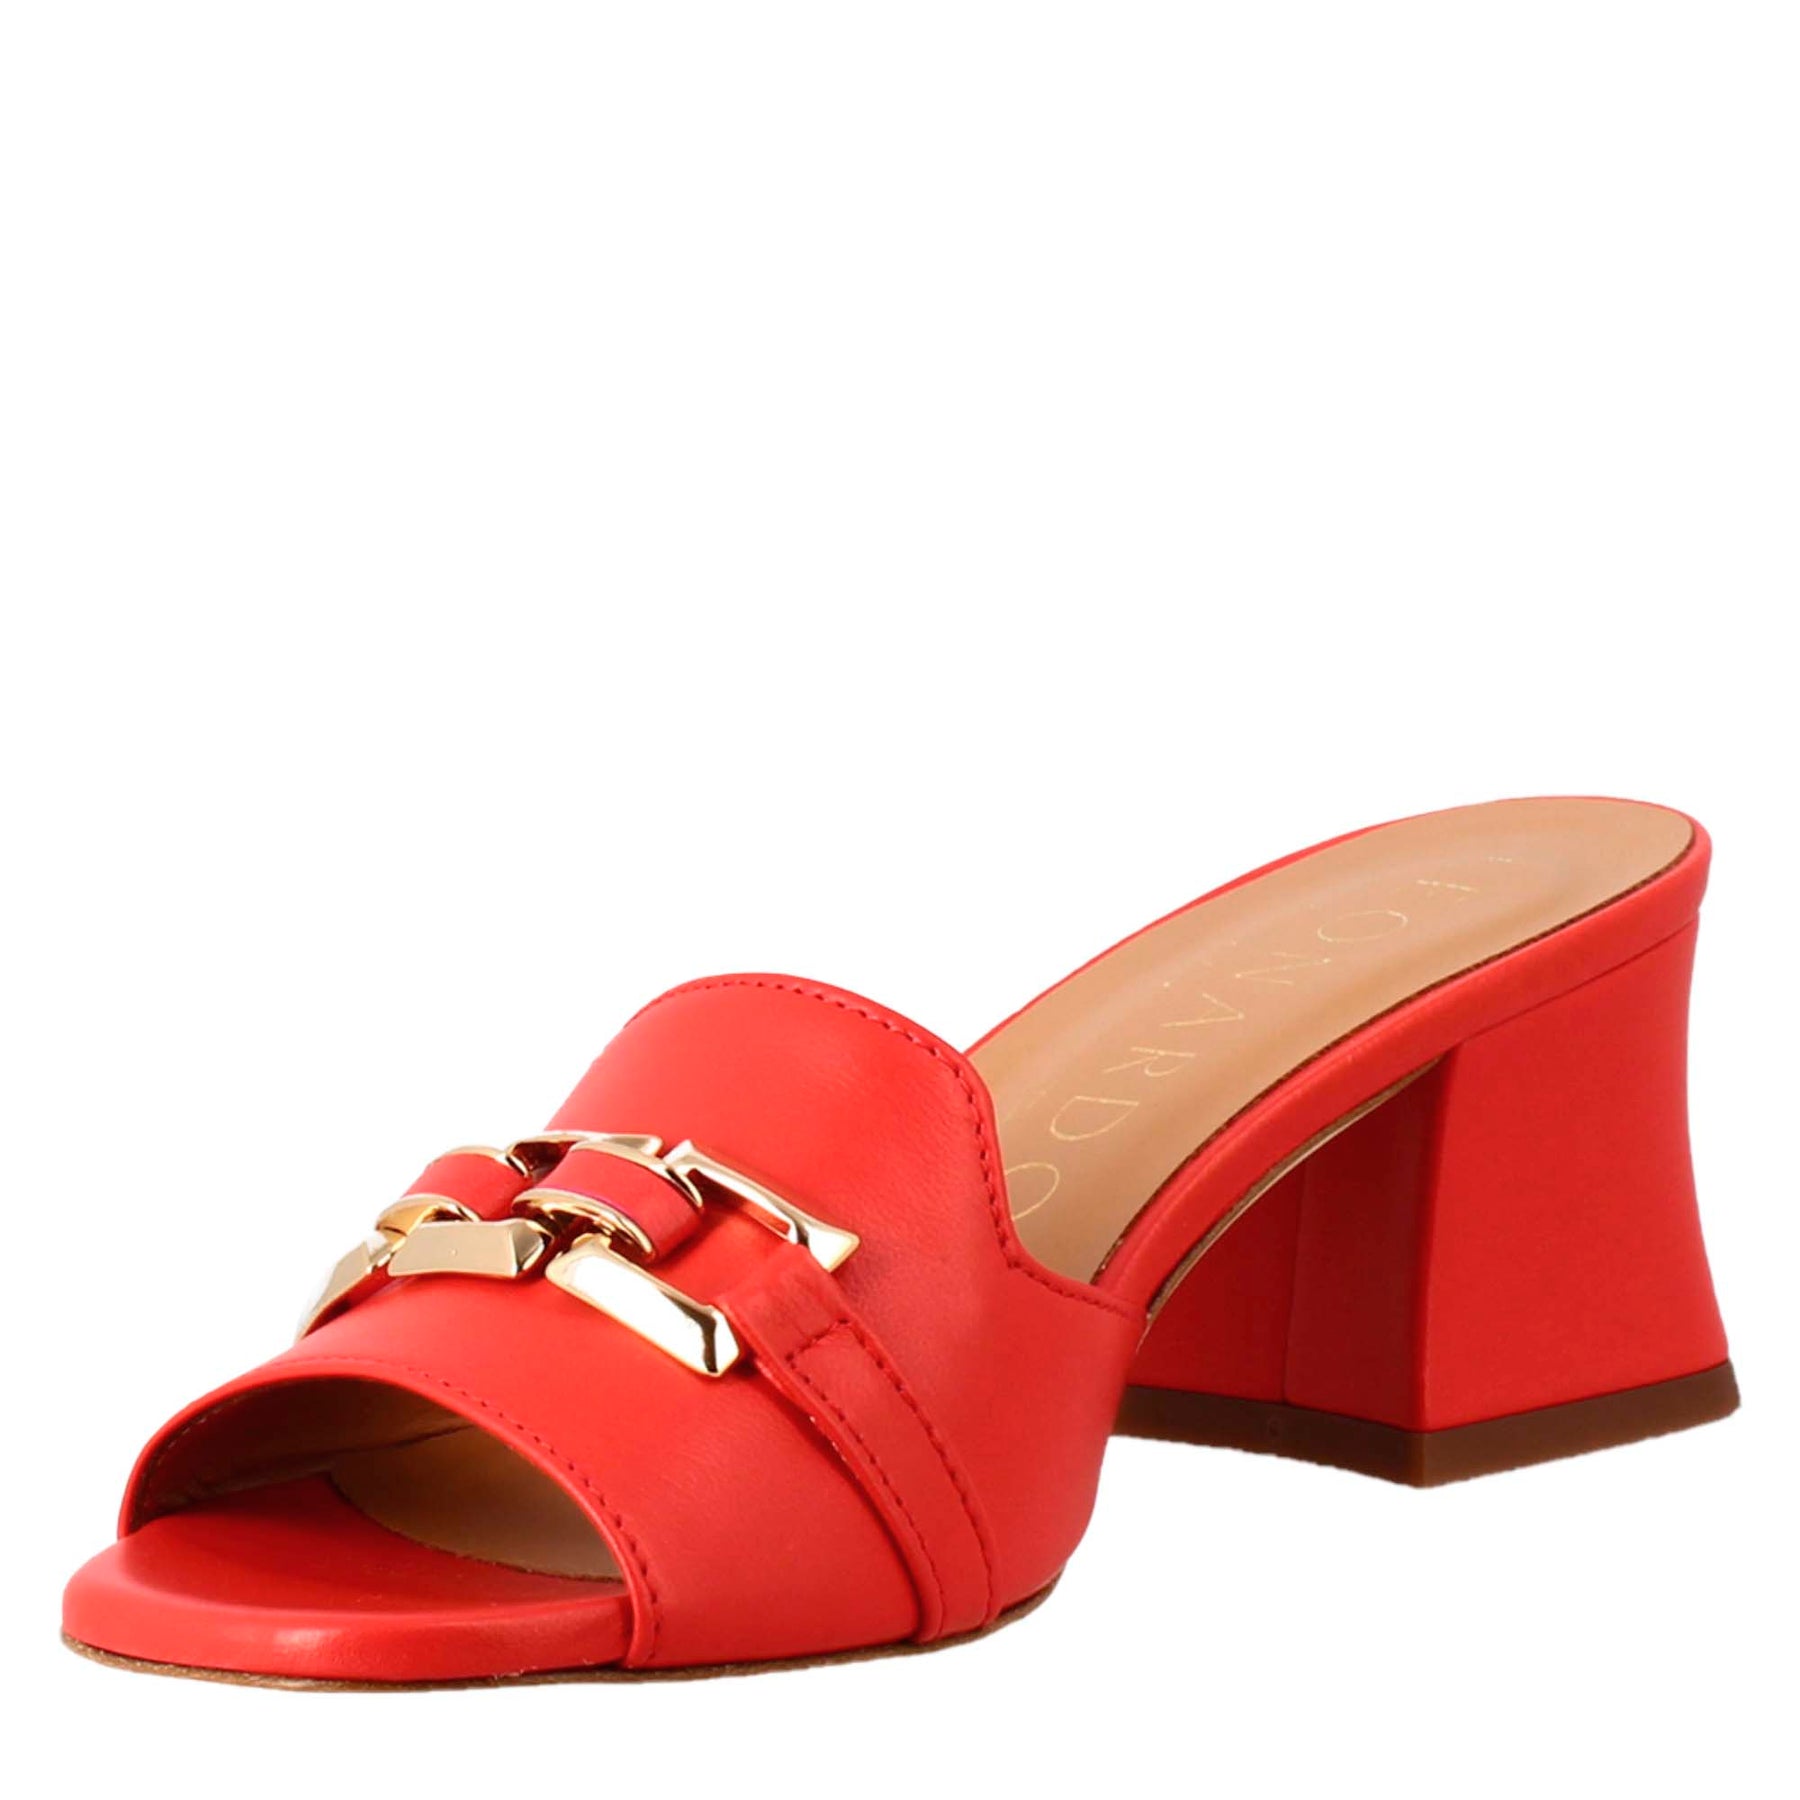 Open sandal with buckle for woman in red leather